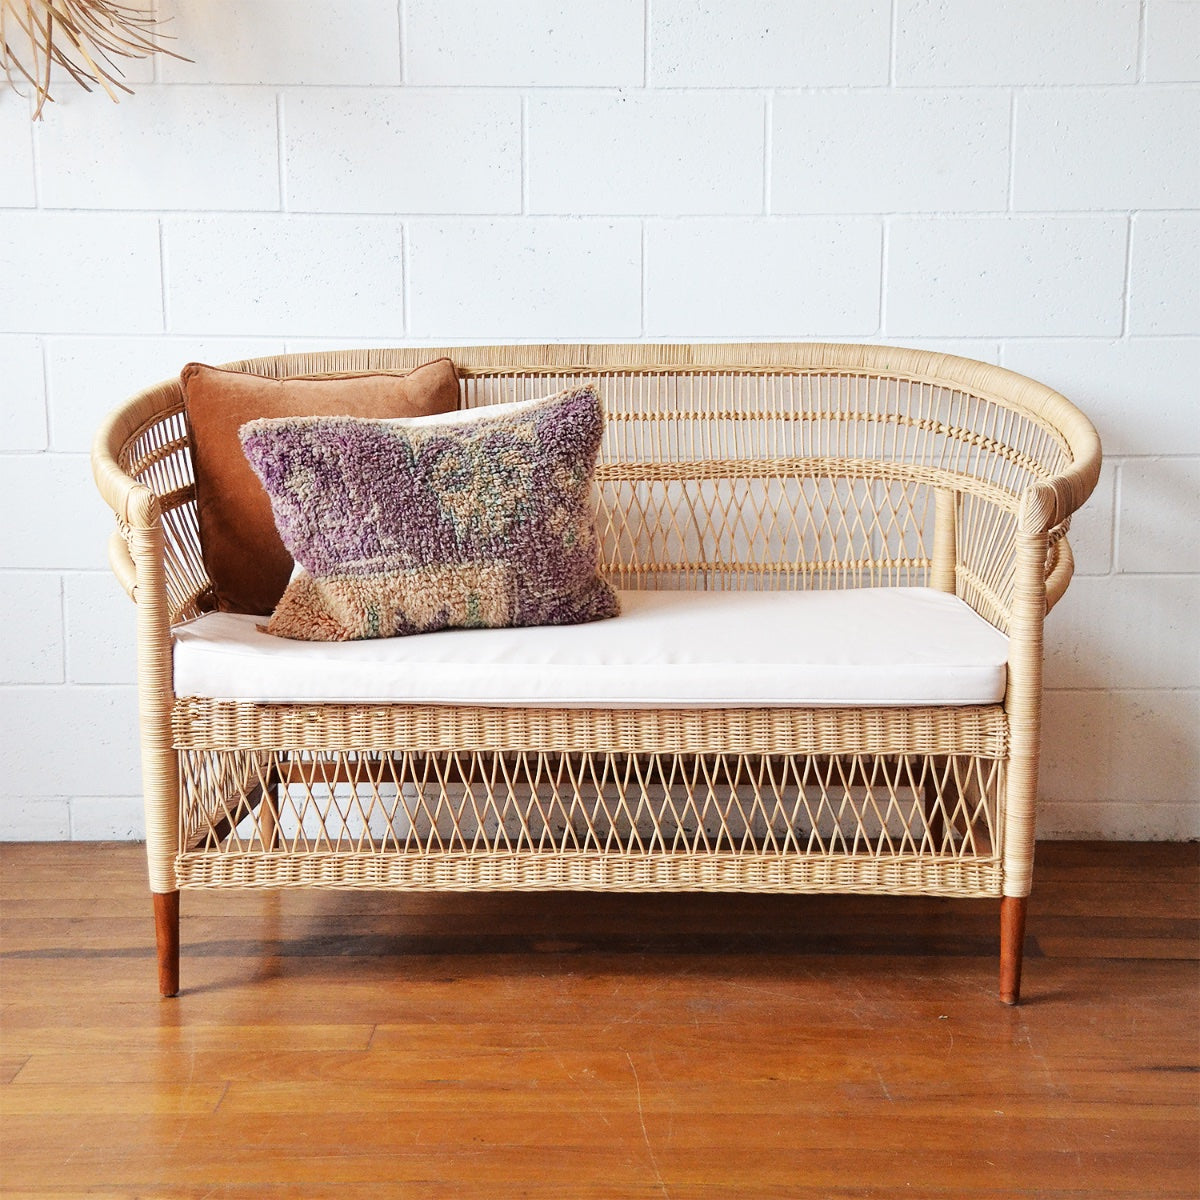 Handwoven Malawi Style Double Rattan Chair